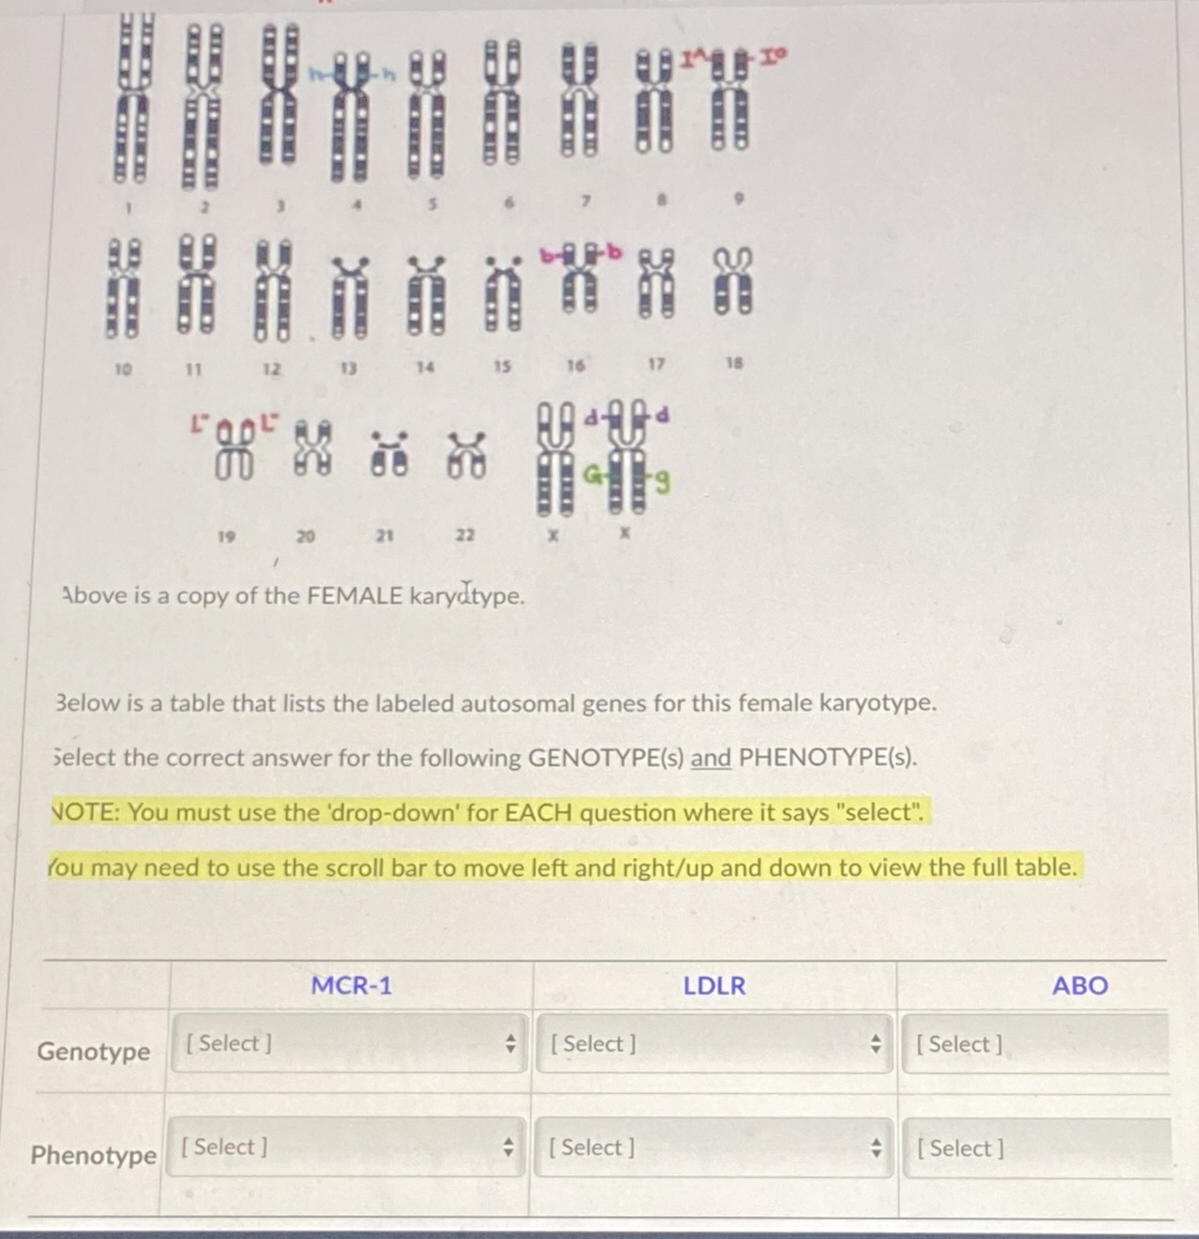 BED
90
10
AMITAD
Genotype
HEAD
Phenotype
FODE
"H
20
[Select]
Above is a copy of the FEMALE karydtype.
[Select]
14
D
******
22
MCR-1
A
6
FDE
Below is a table that lists the labeled autosomal genes for this female karyotype.
Select the correct answer for the following GENOTYPE(s) and PHENOTYPE(s).
NOTE: You must use the 'drop-down' for EACH question where it says "select".
You may need to use the scroll bar to move left and right/up and down to view the full table.
AND
Add
+ [Select]
7
[Select]
LDLR
[Select]
[Select]
ABO